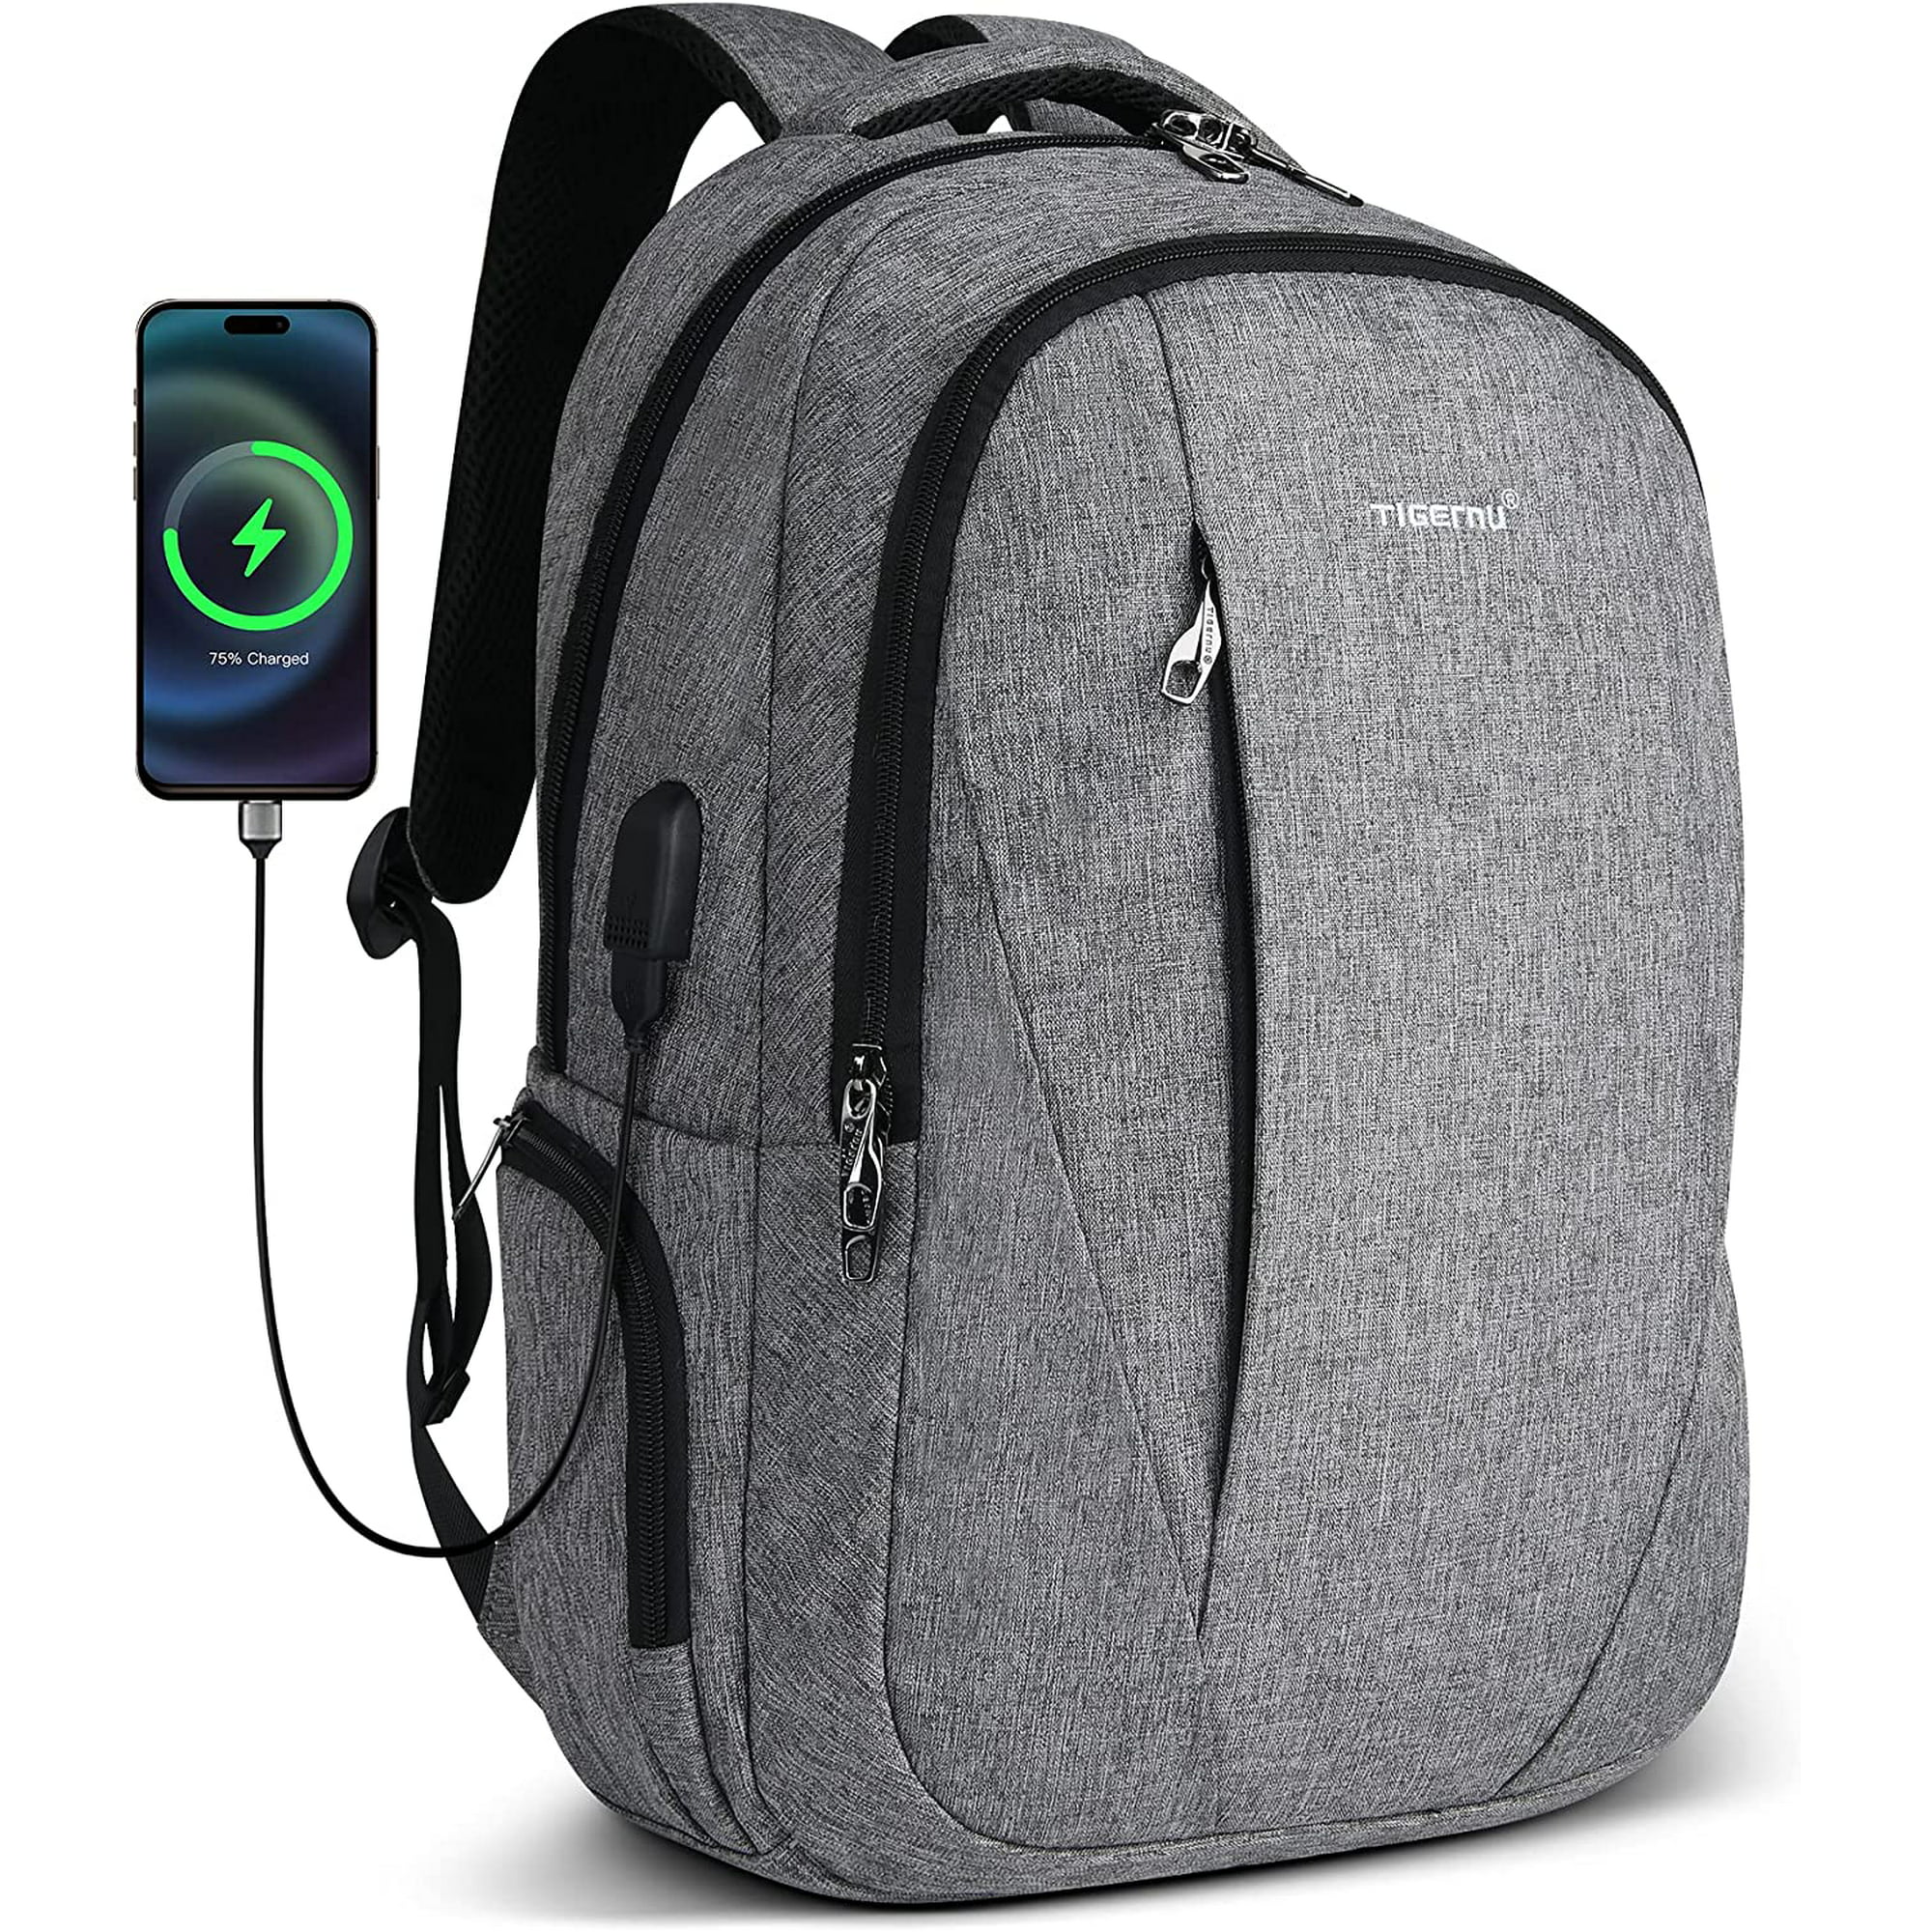 Anti Theft Tech Backpack with USB Charging Port $22.99 (reg $75)